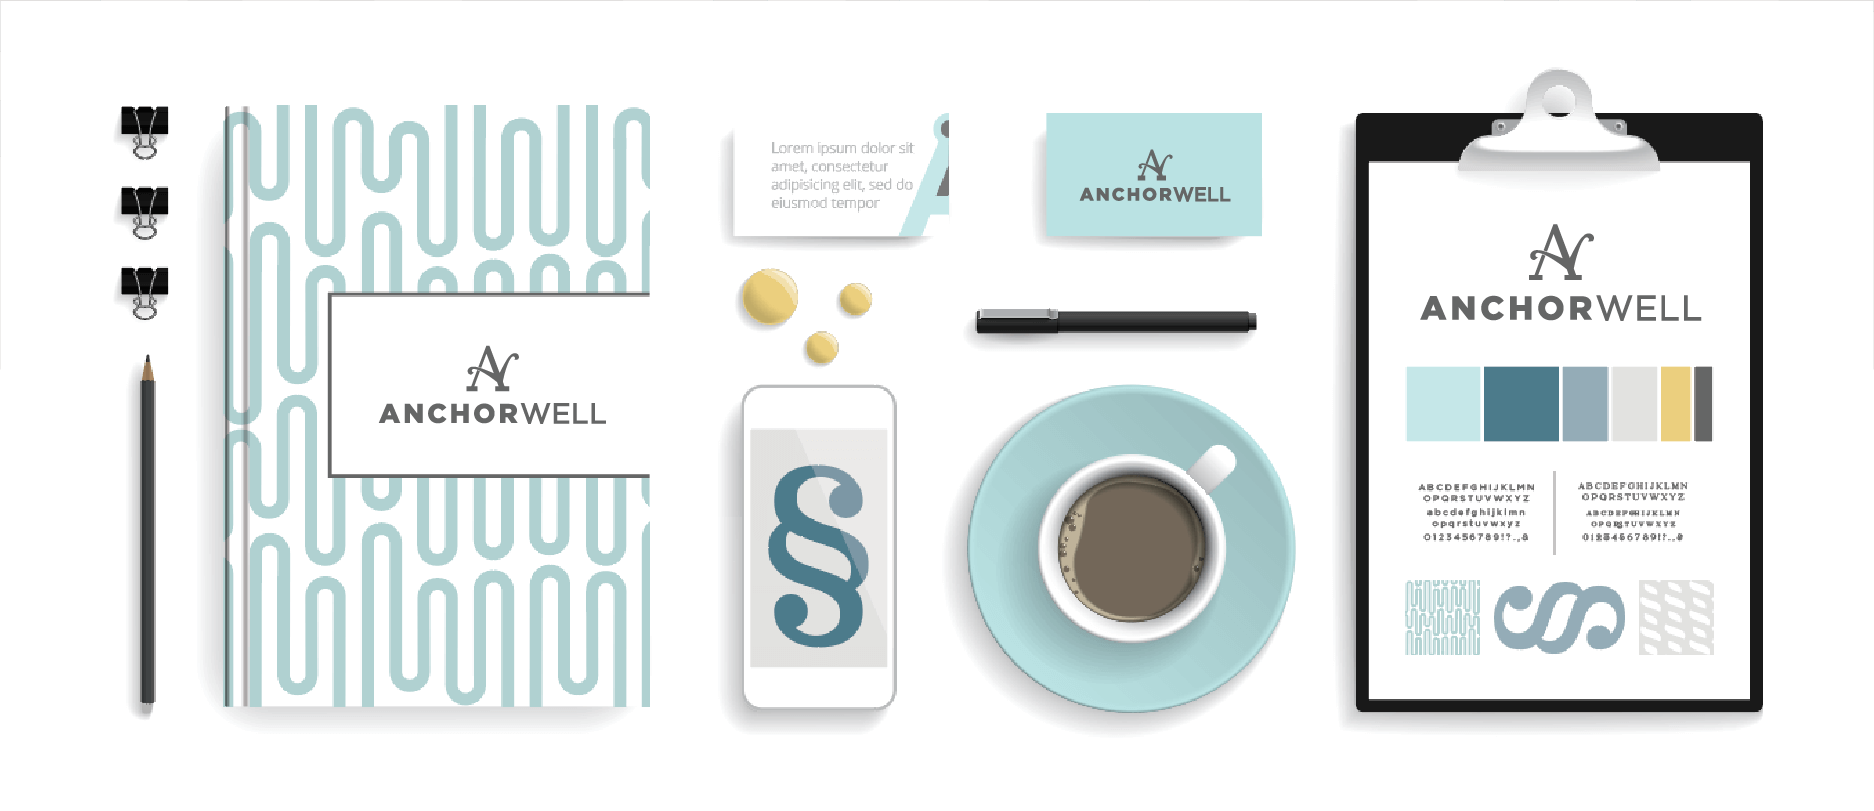 Branding applied to journals, business cards, and stationery for AnchorWell.